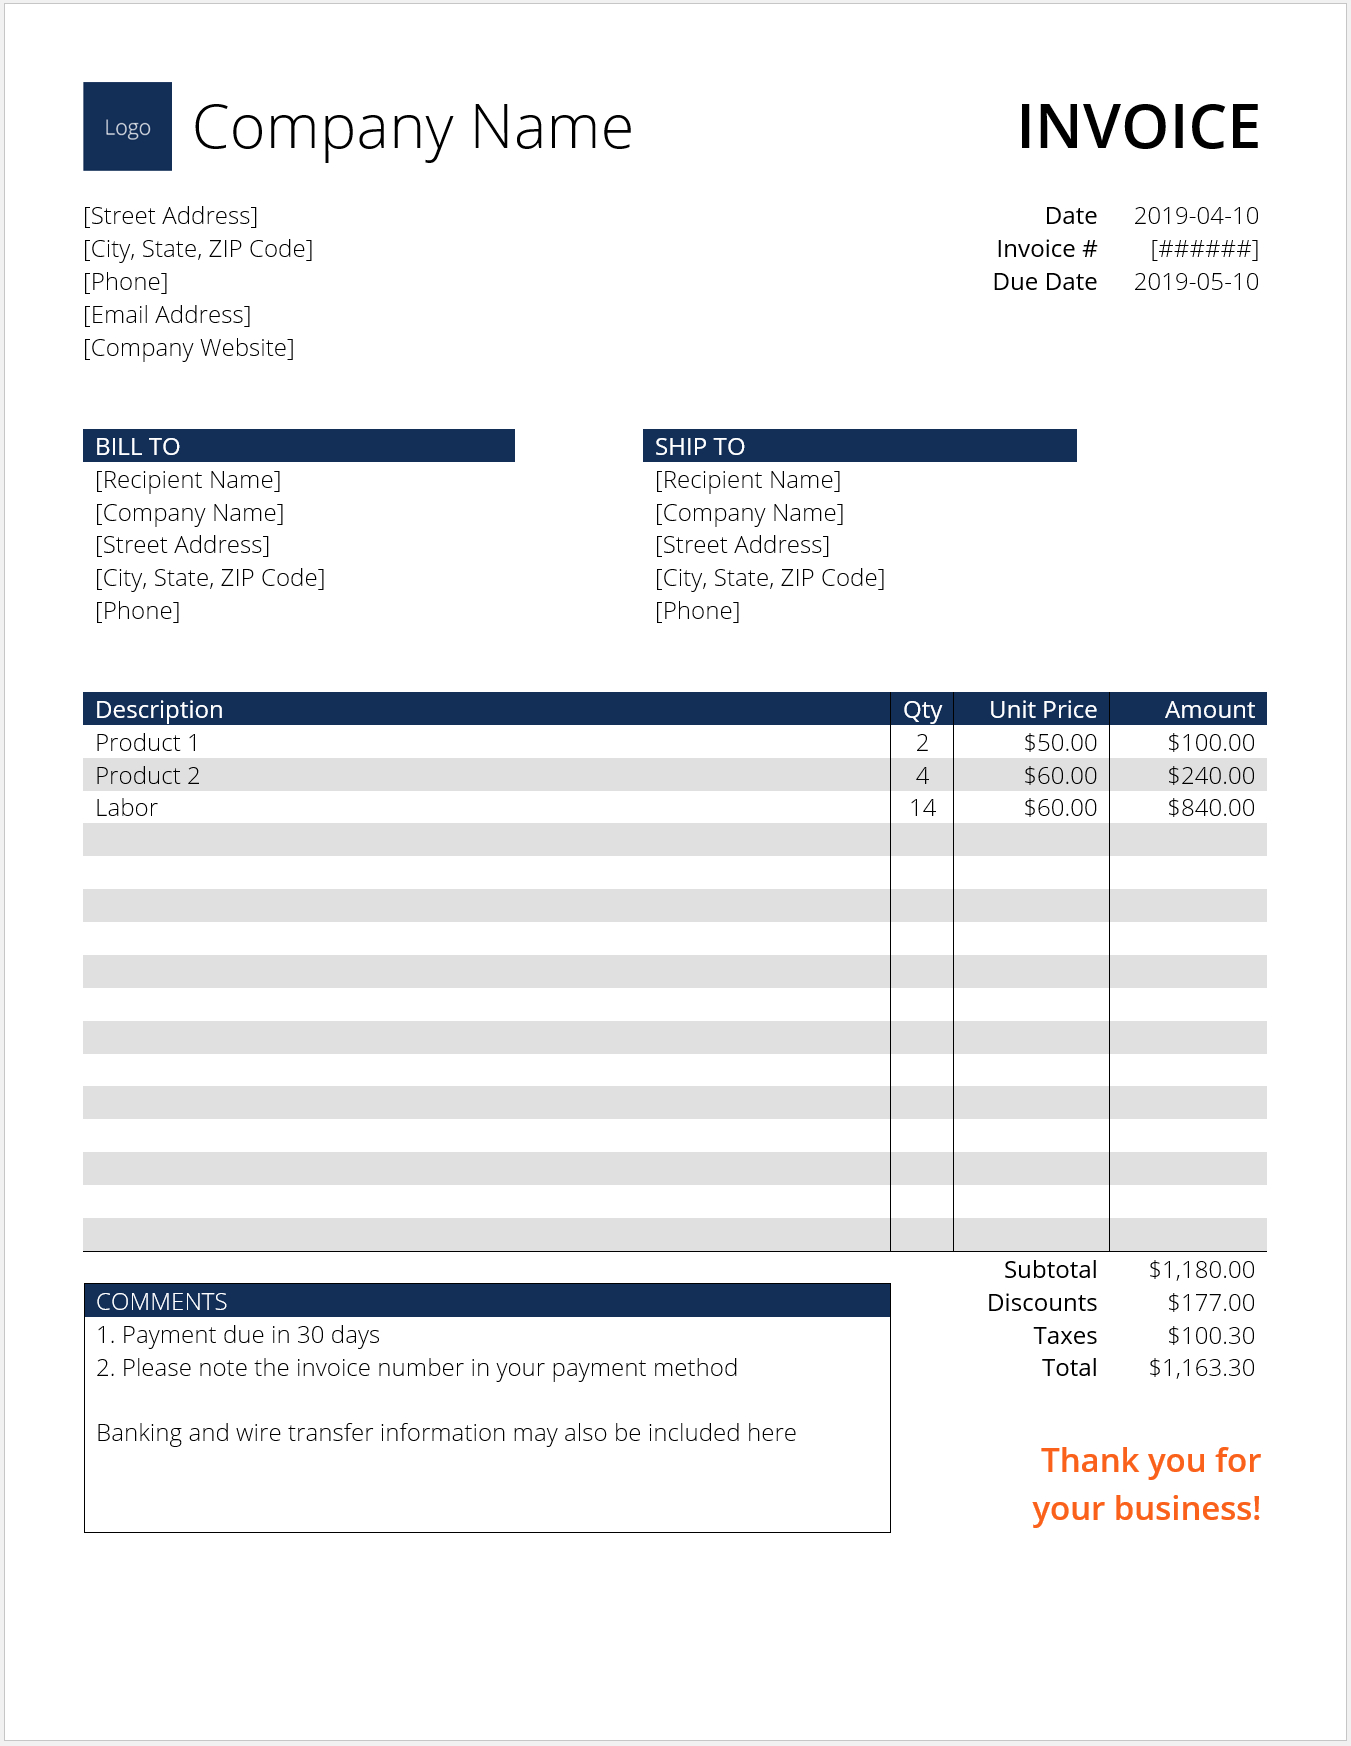 Invoice Template (Word) – Download Free Template At Cfi Inside Image Of Invoice Template